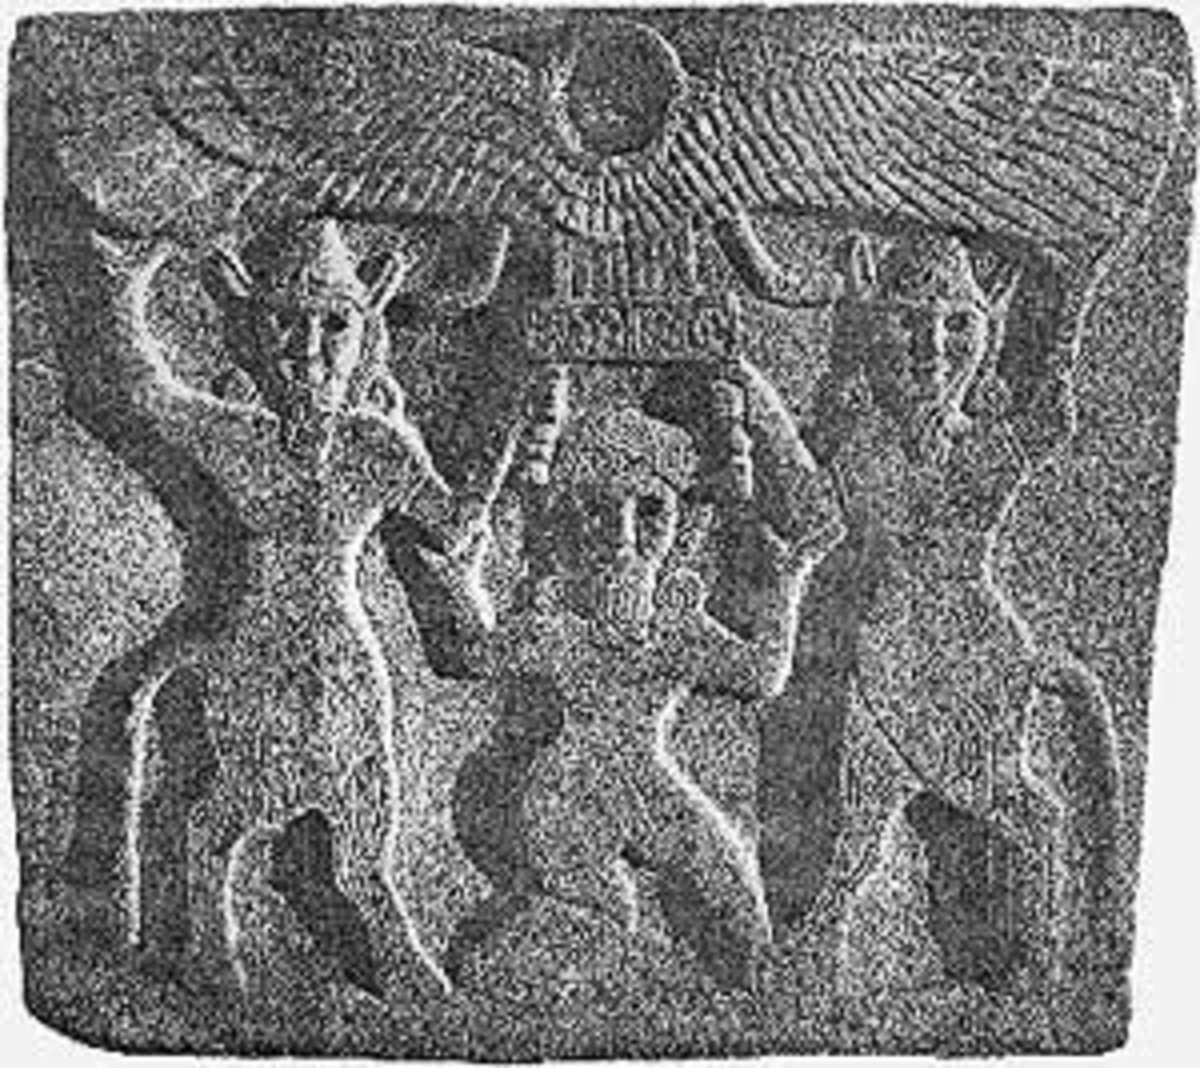 9th century BC orthostat relief found in Kapara's palace, Tell Halaf, depicting "Gilgamesh Between Two Bull-Men Supporting a Winged Sun Disk"